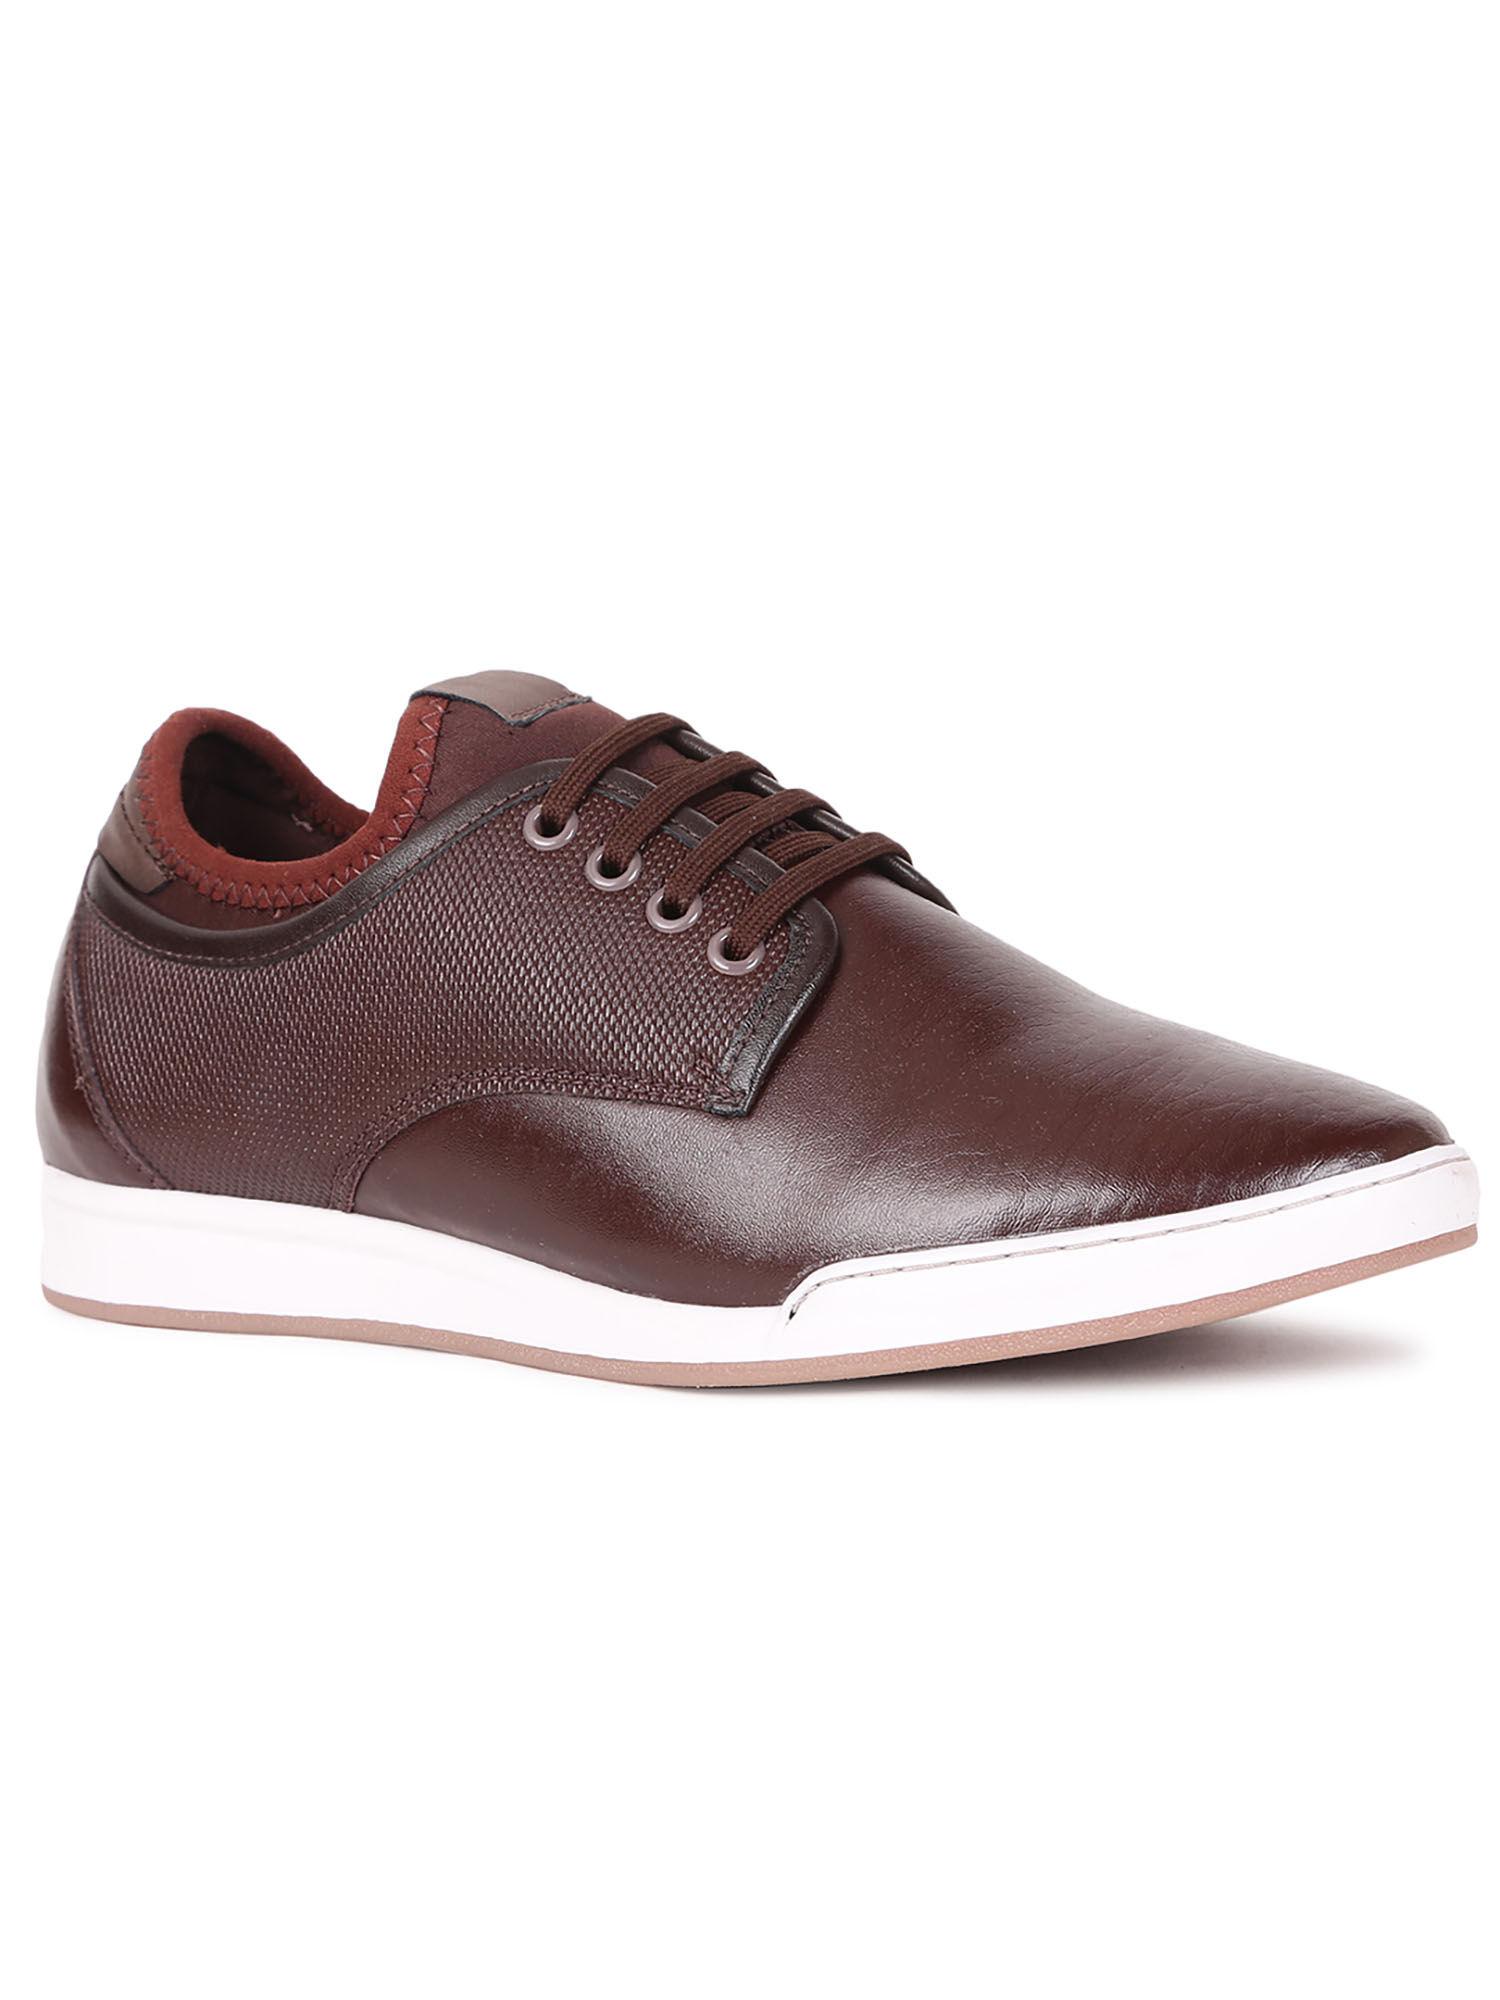 men-brown-lace-up-casual-shoes